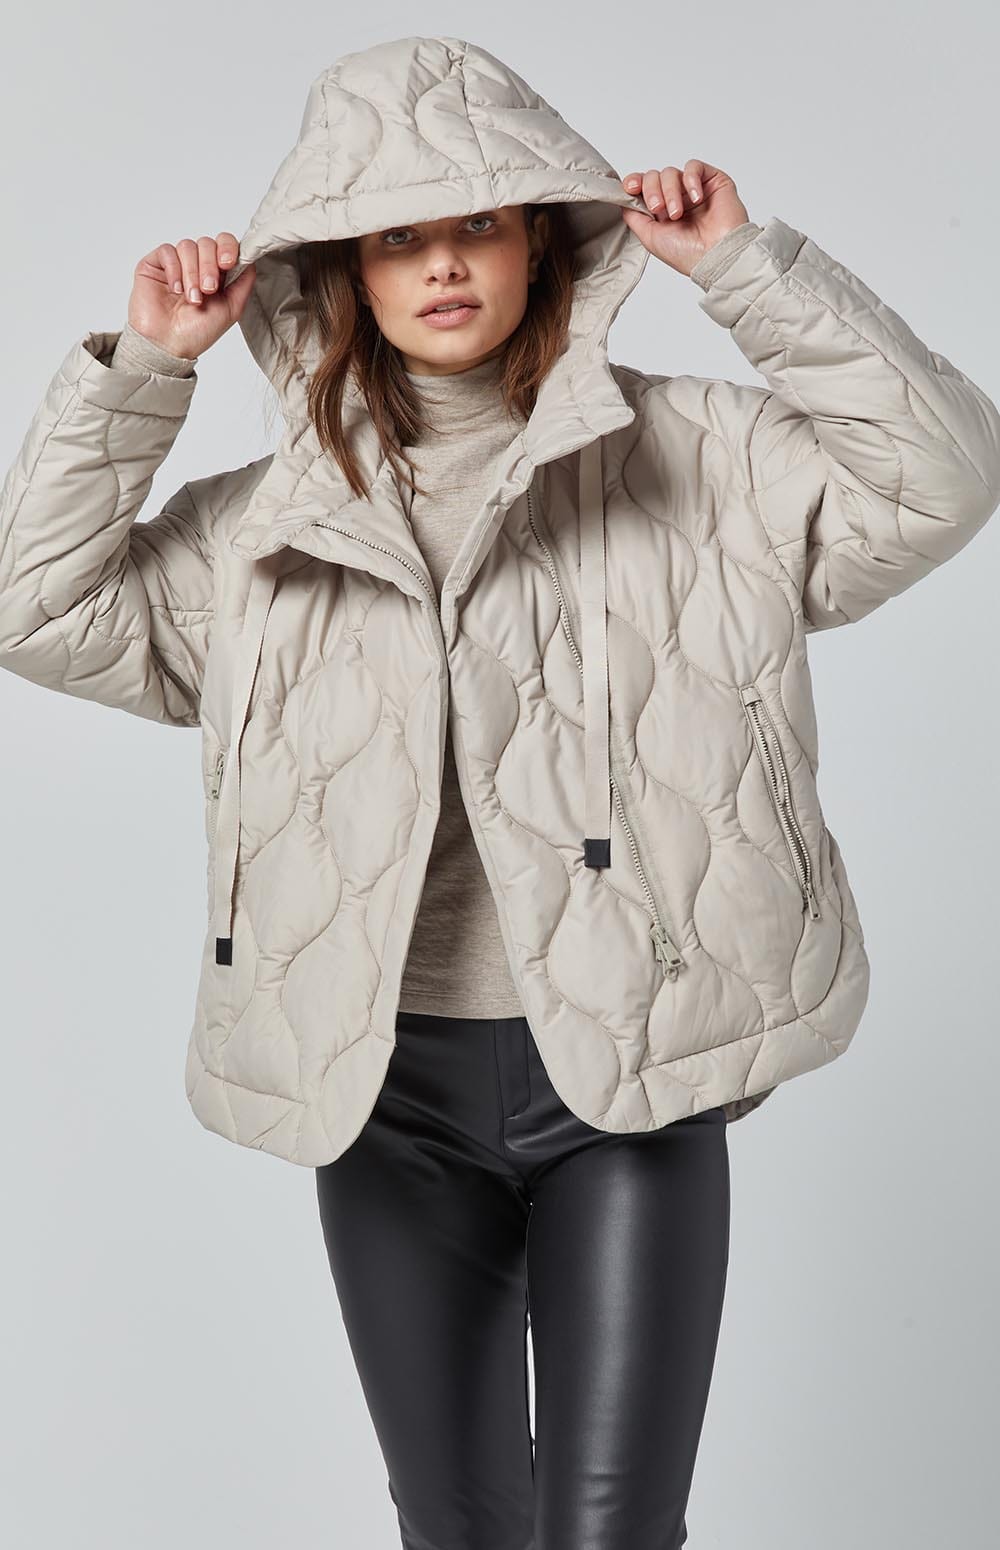 ANR Womens Jacket Nori Quilted Jacket | Tan